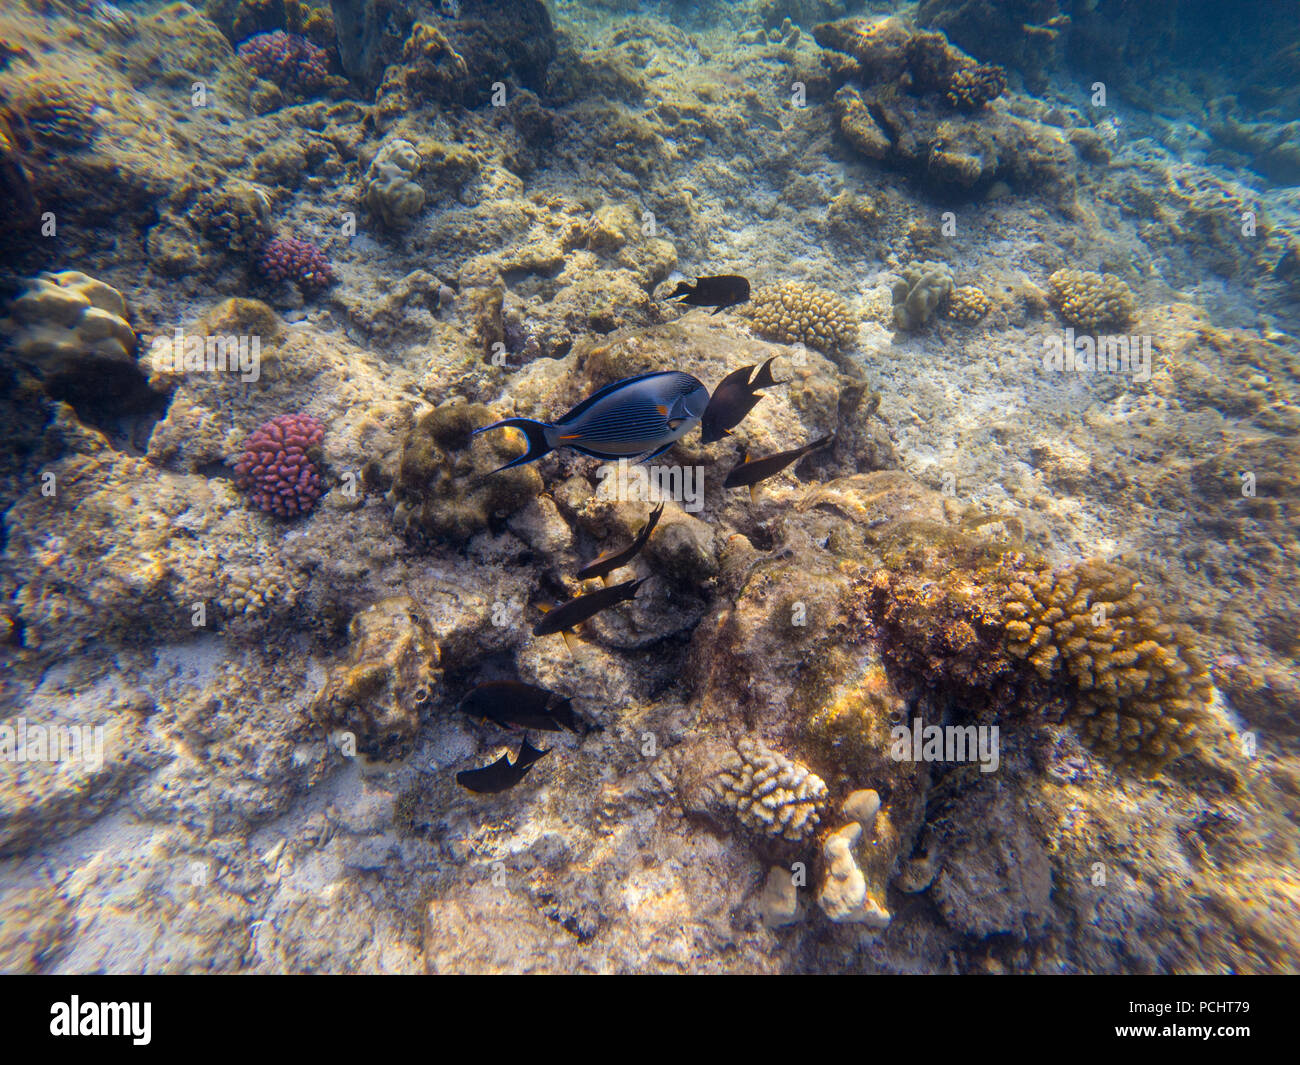 Black surgeonfish and Arabian sohal surgeon fish in the natural environment swimming by coral reef Stock Photo